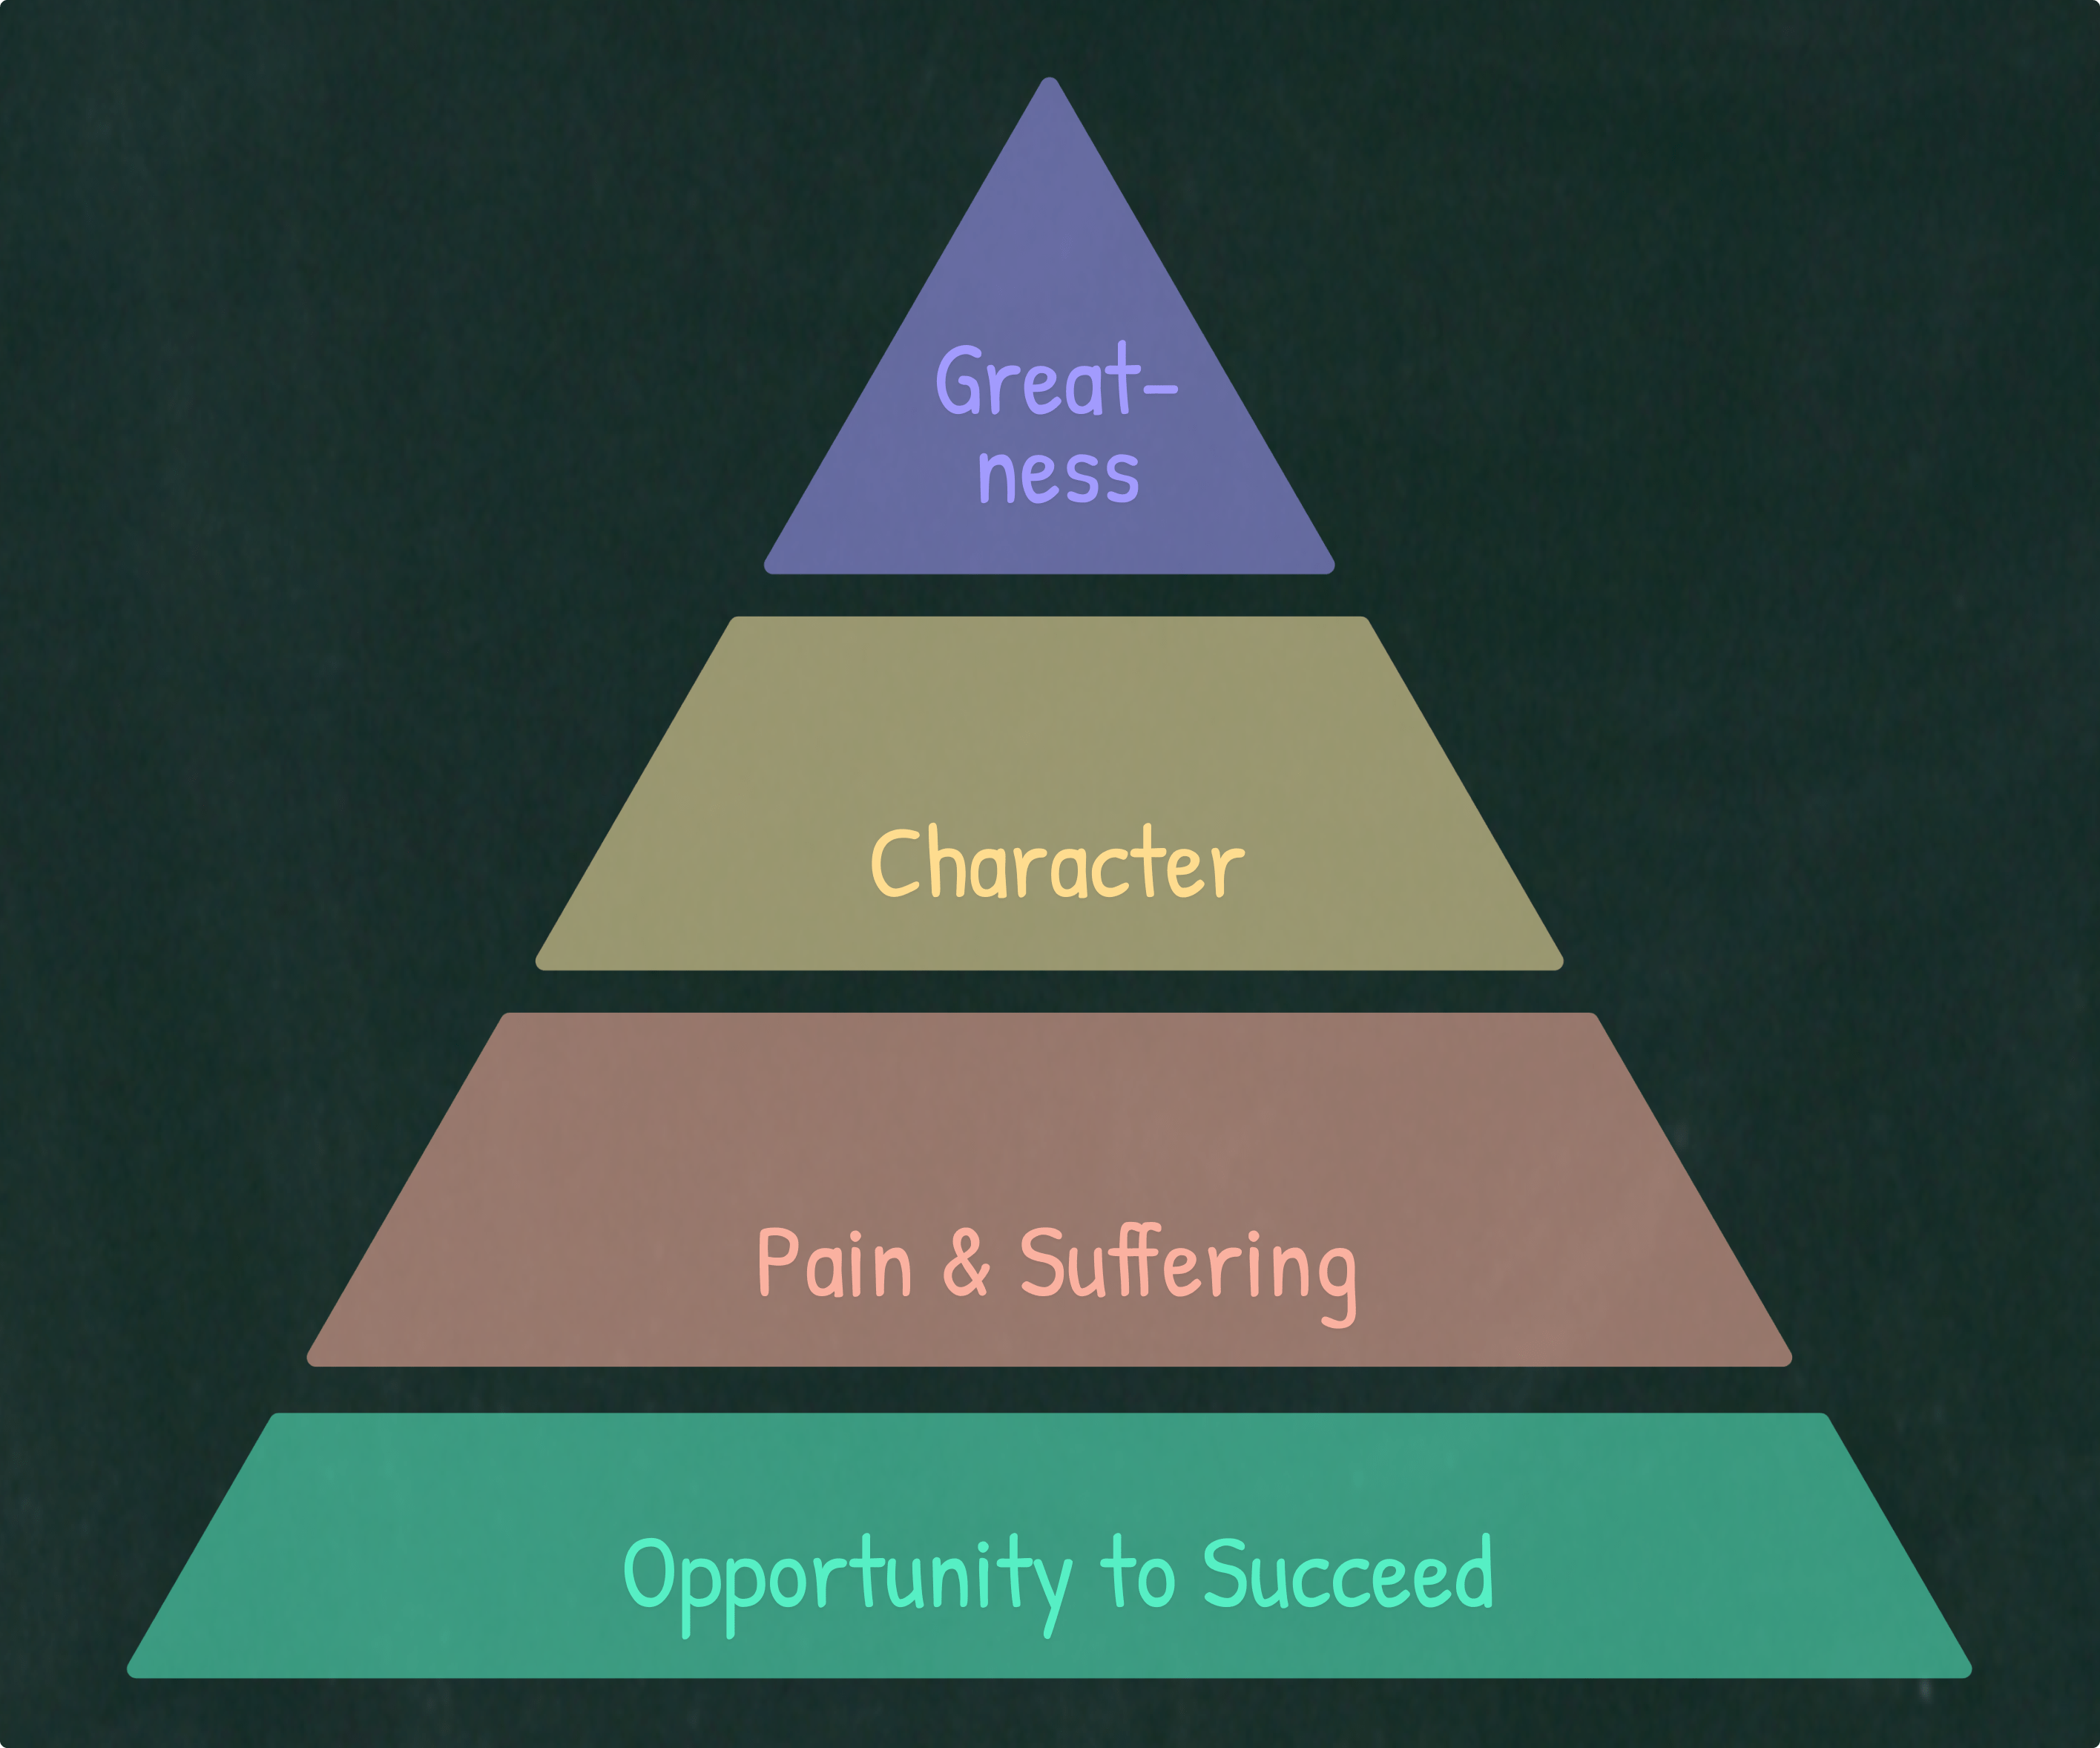 Triangle that illustrates that Greatness comes from Character, and Character is built through hardship (with also the opportunity to succeed)